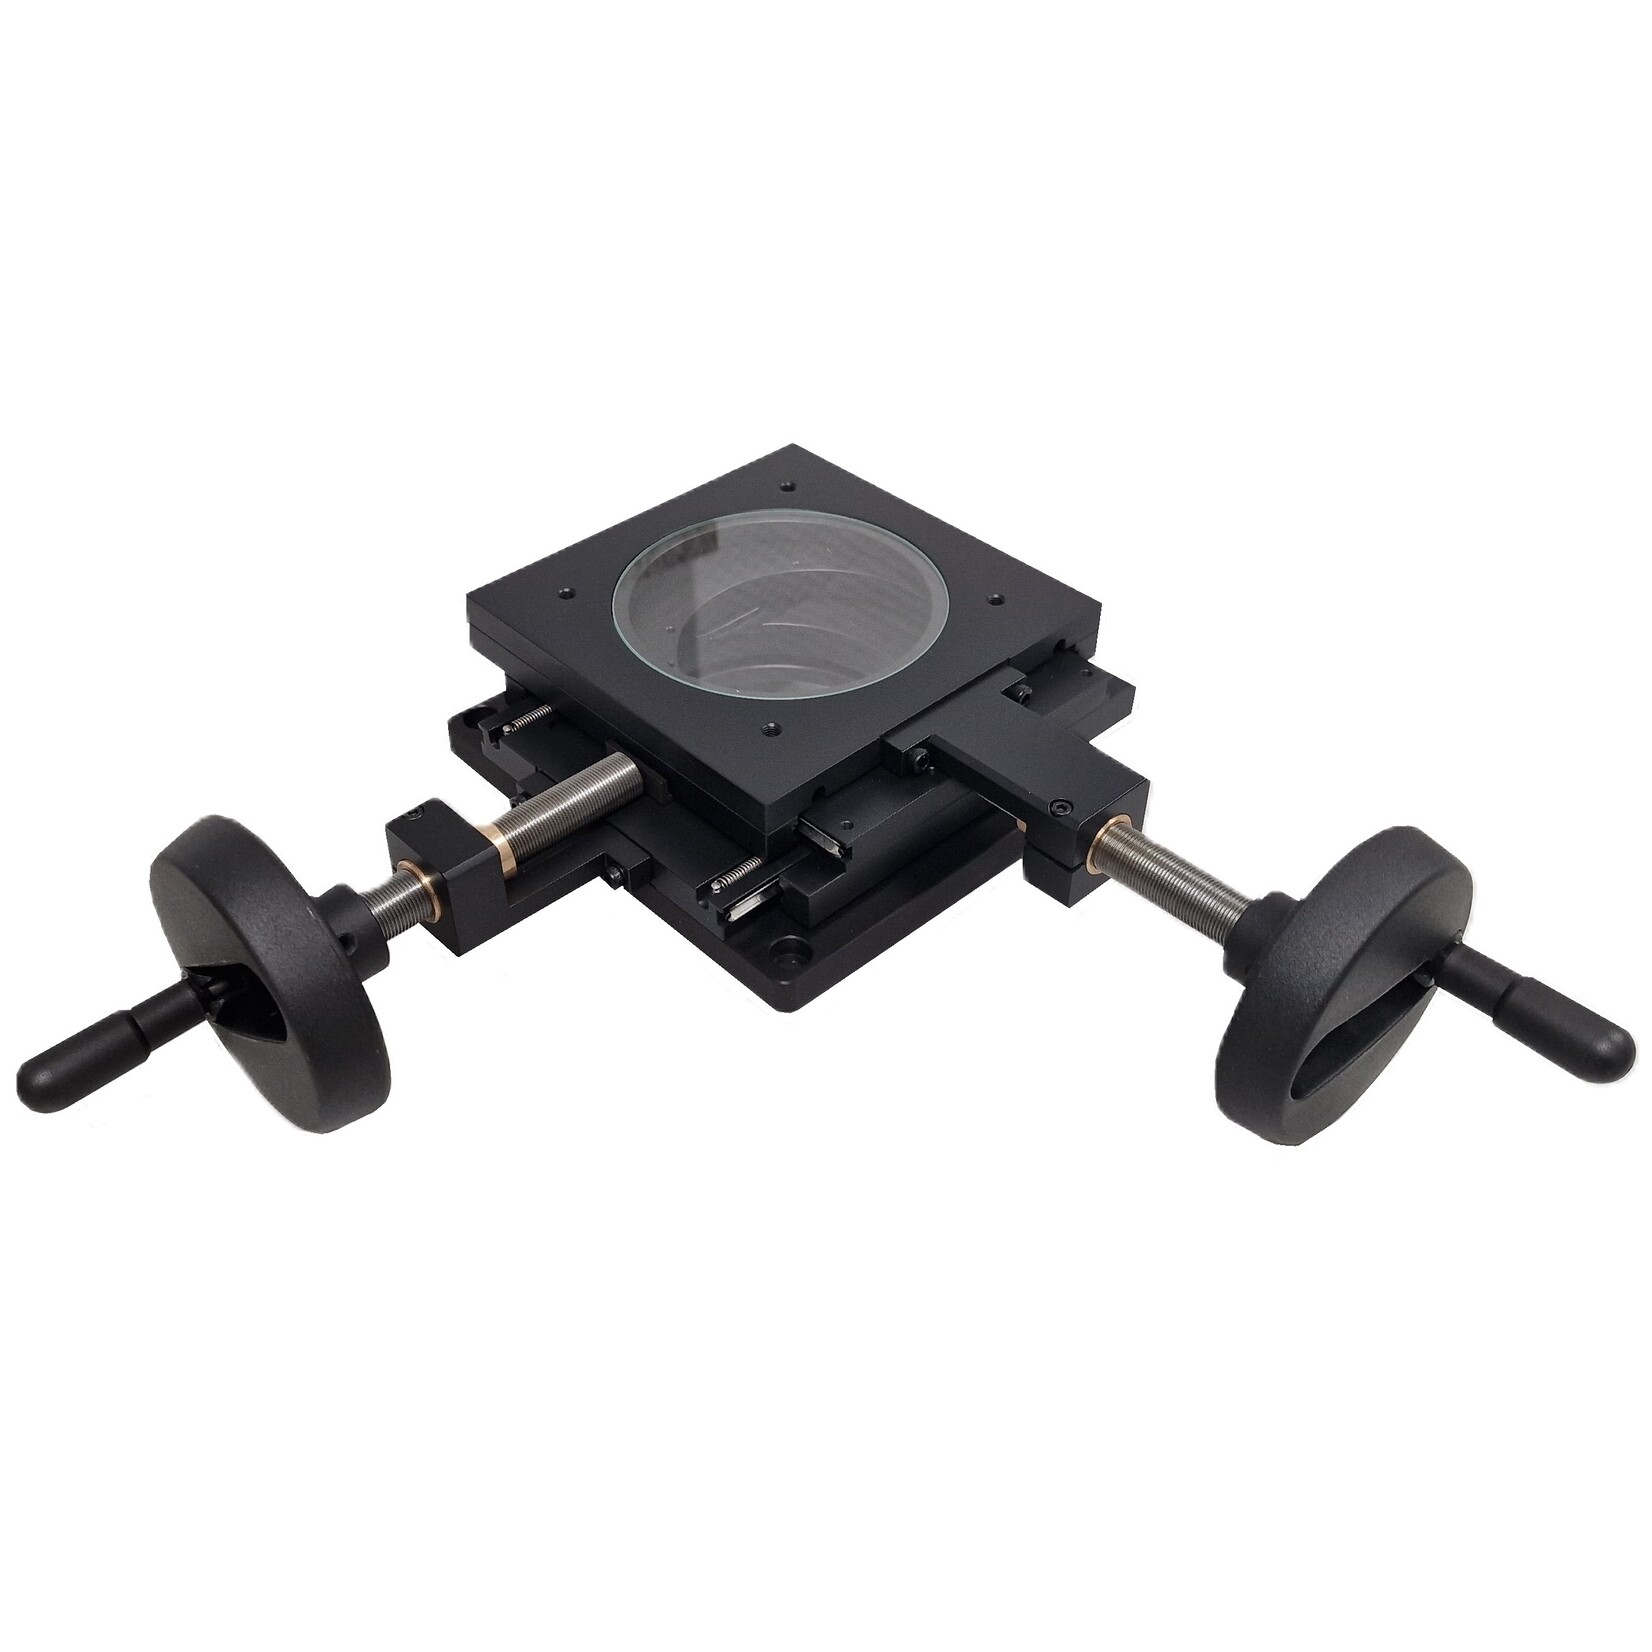 Precision positioning table with 50 x 50 mm travel range